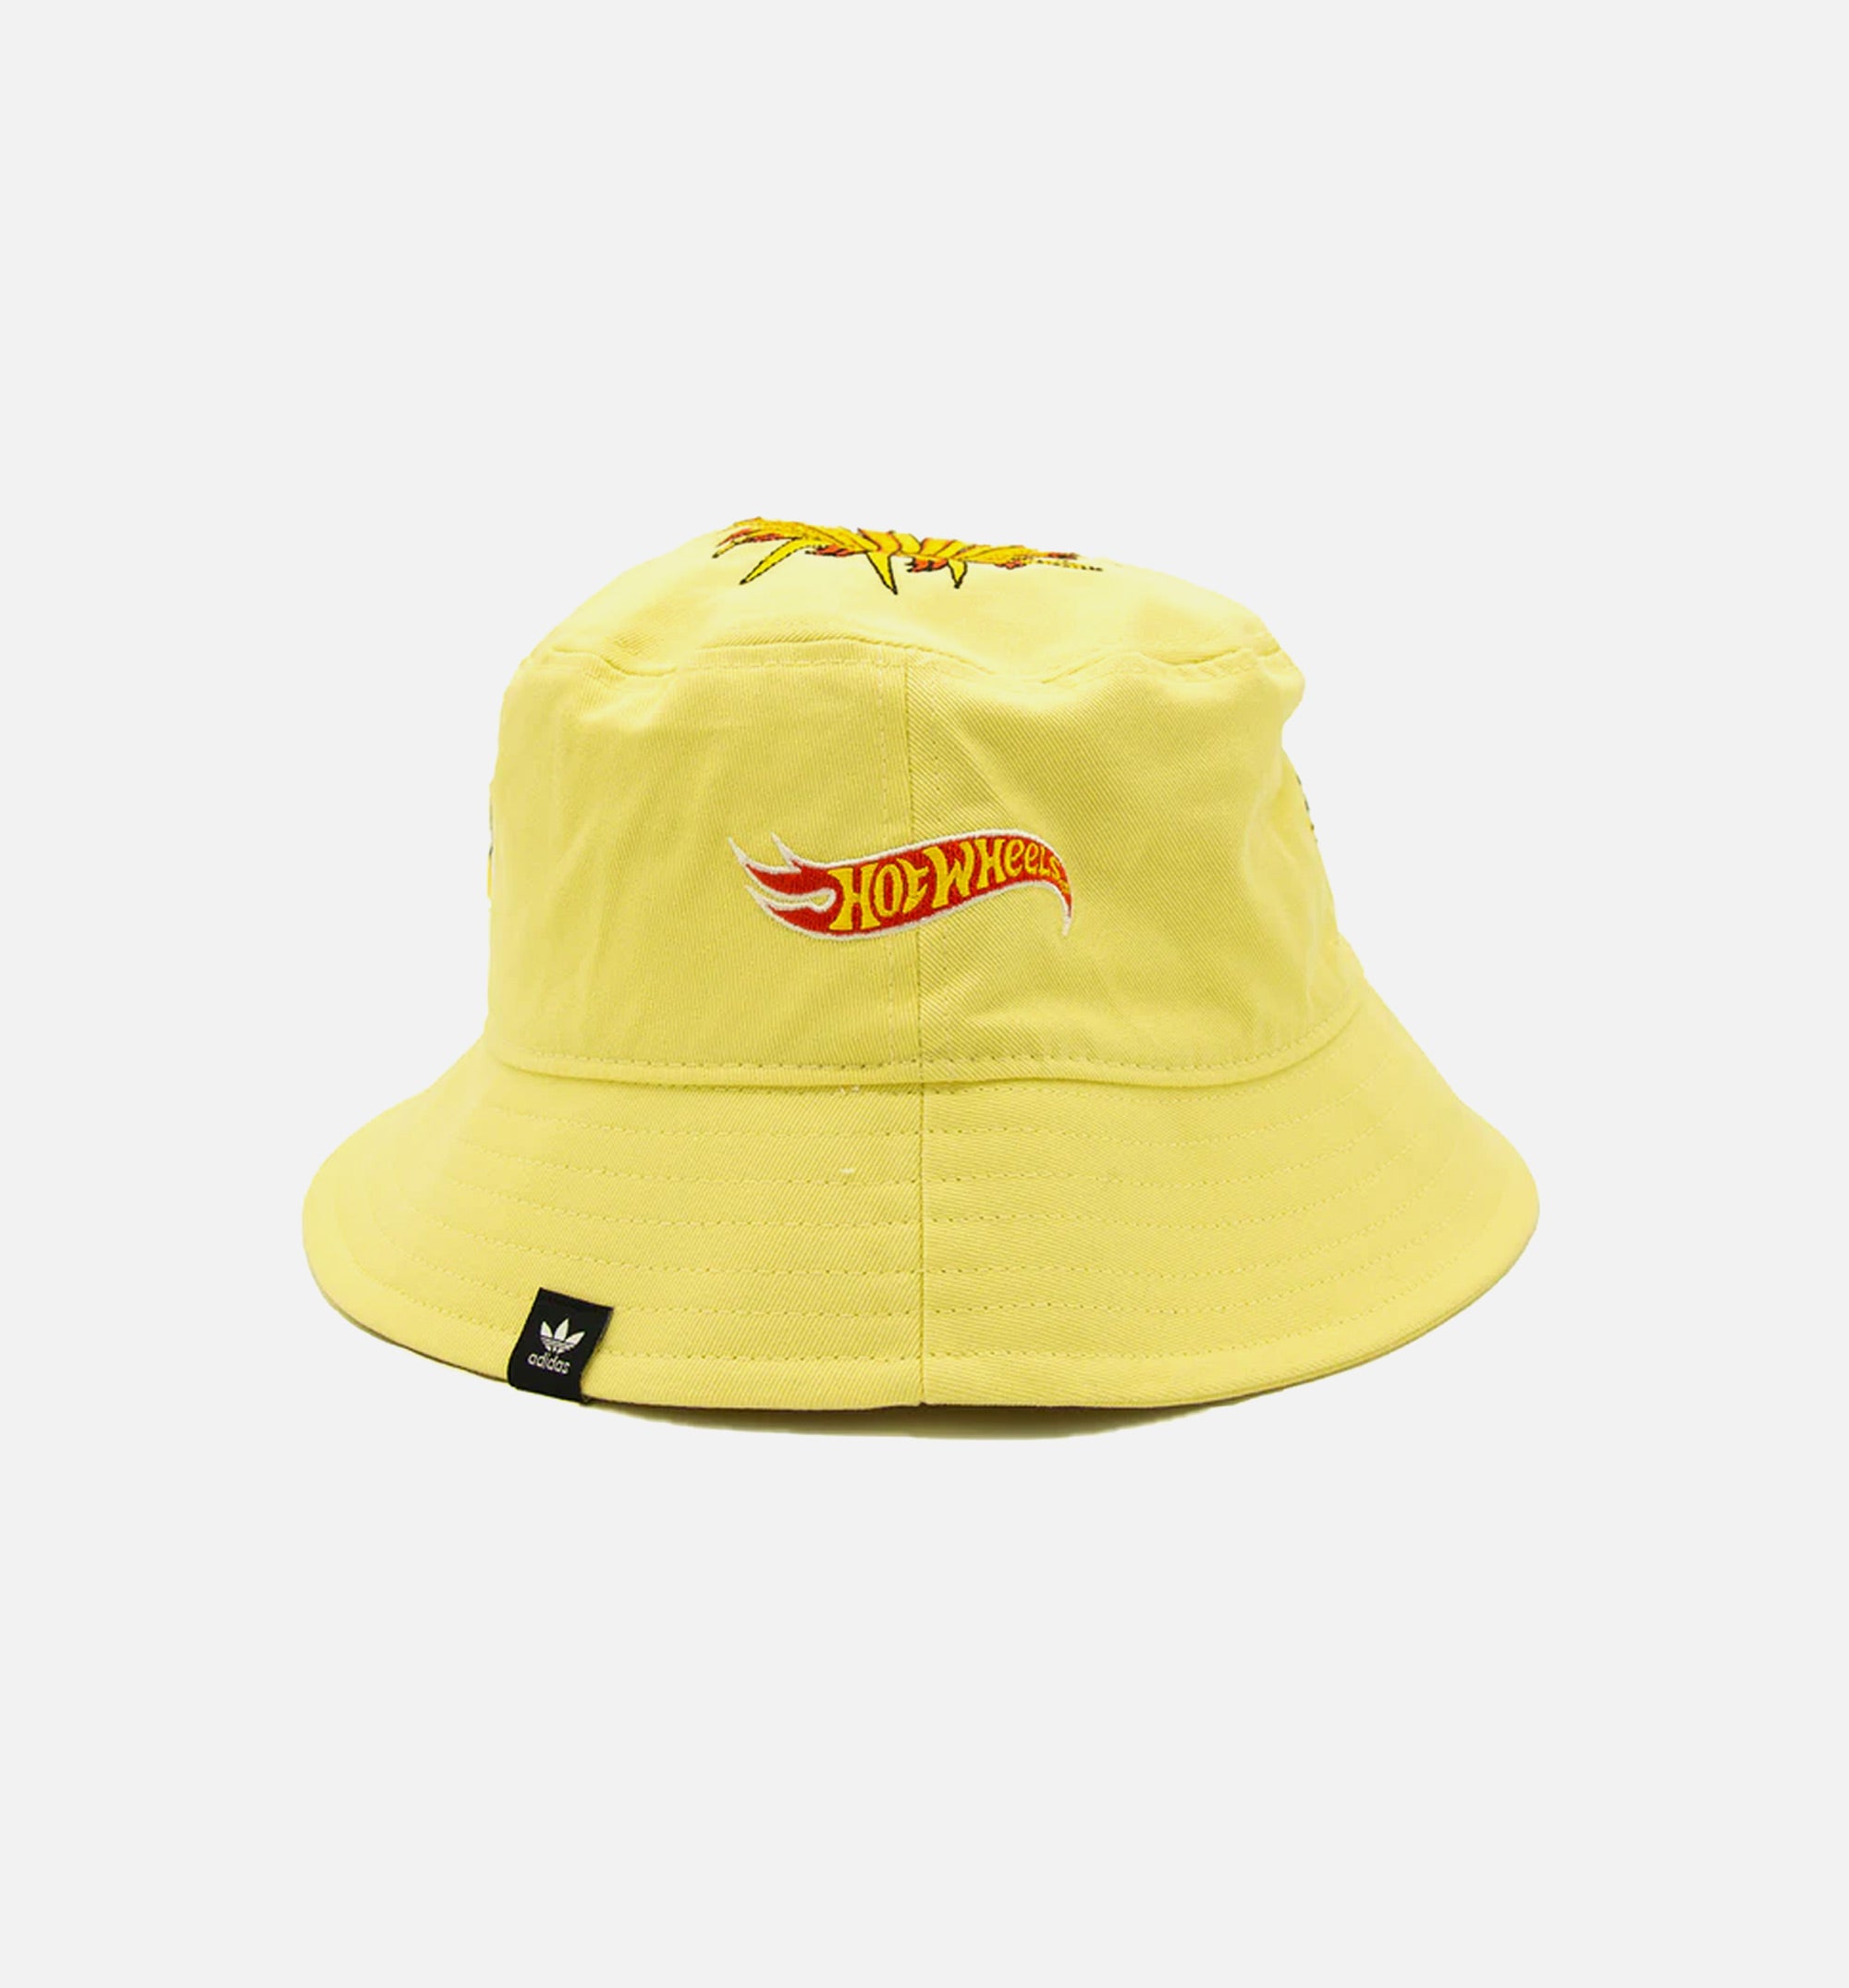 Adidas Consortium Sean Wotherspoon Hot Wheels Bucket Hat Mens Hat - Yellow